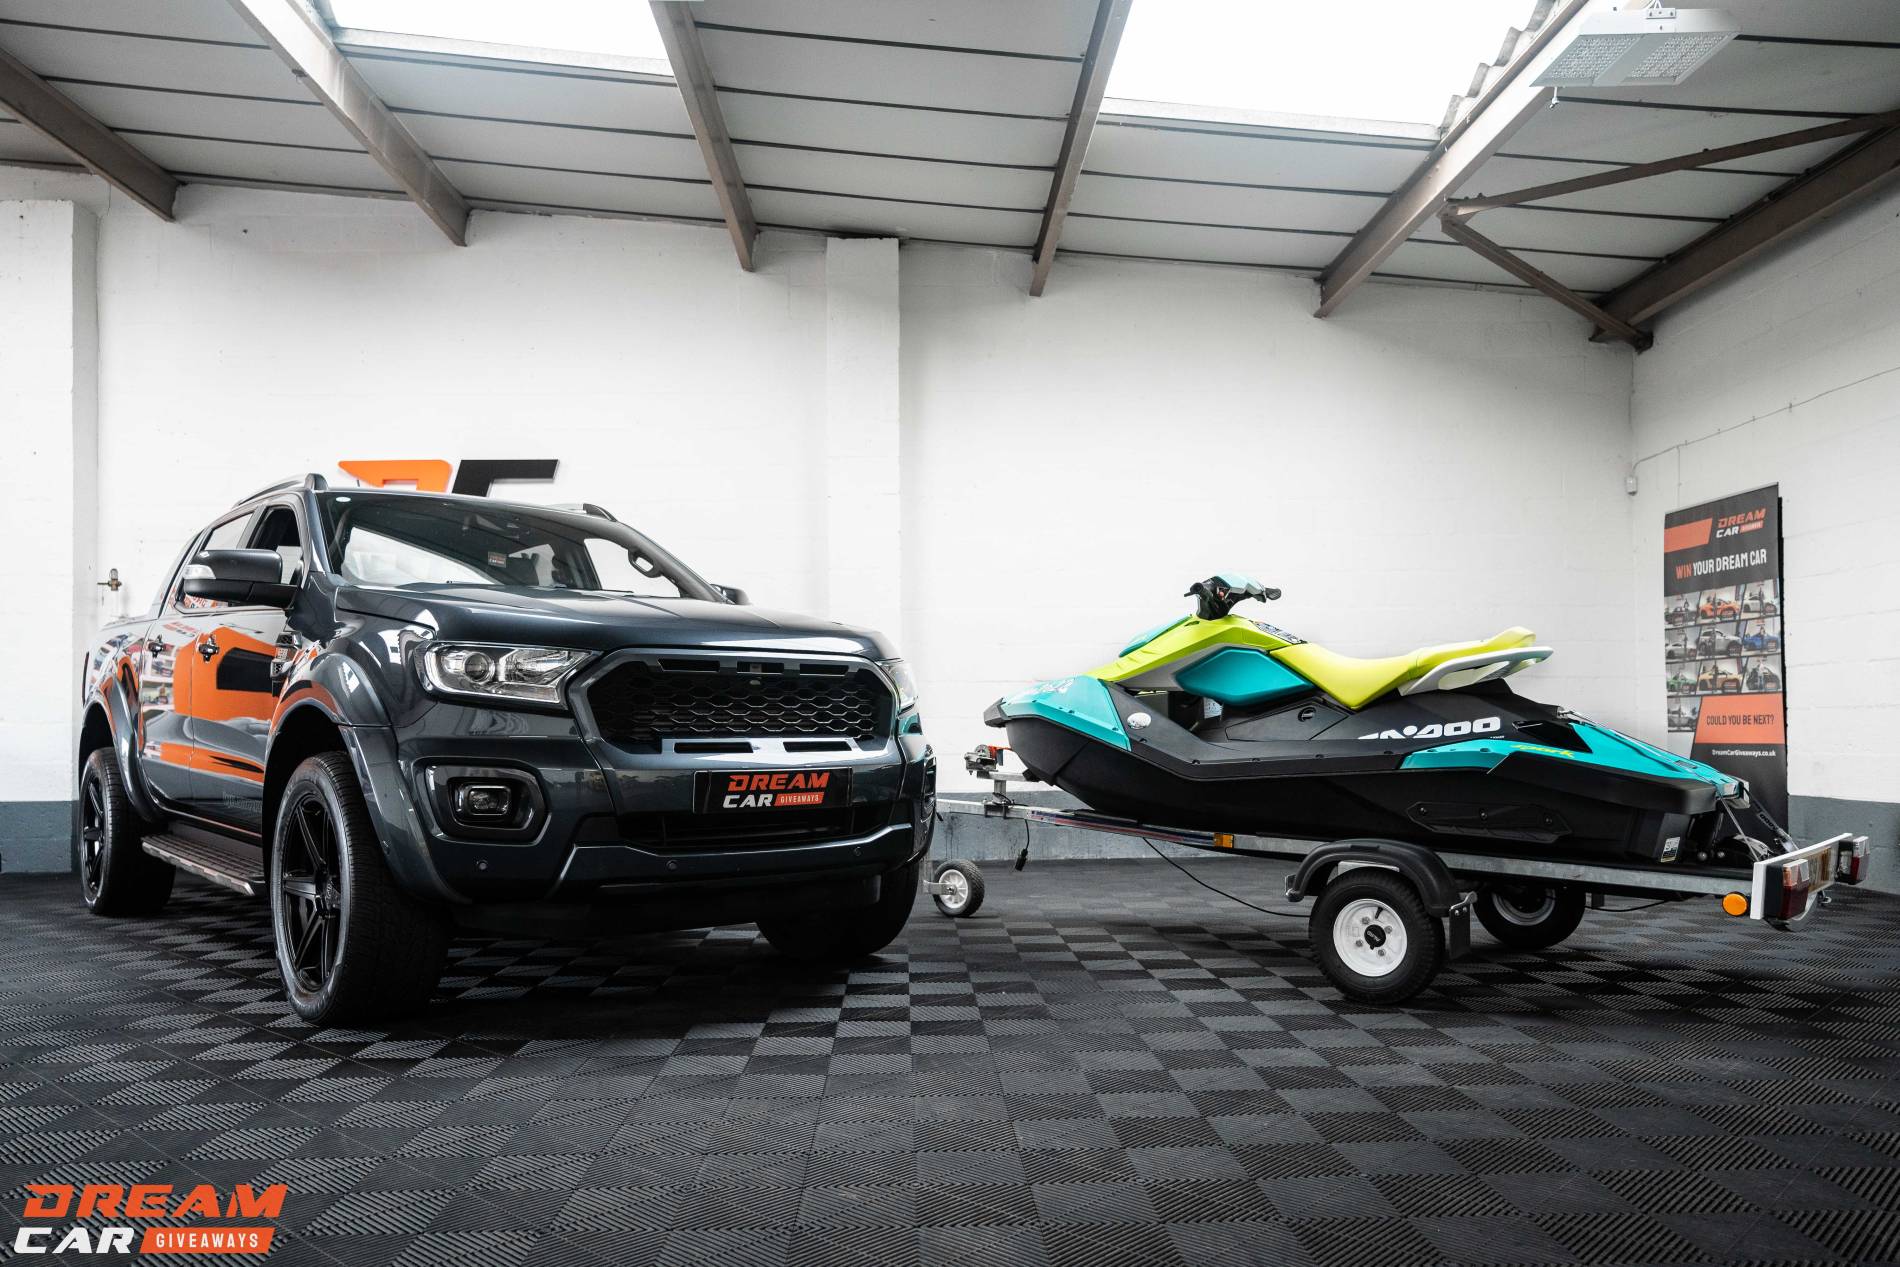 Win this Ford Ranger & Seadoo Spark Jet Ski & £1,000 or £35,500 Tax Free